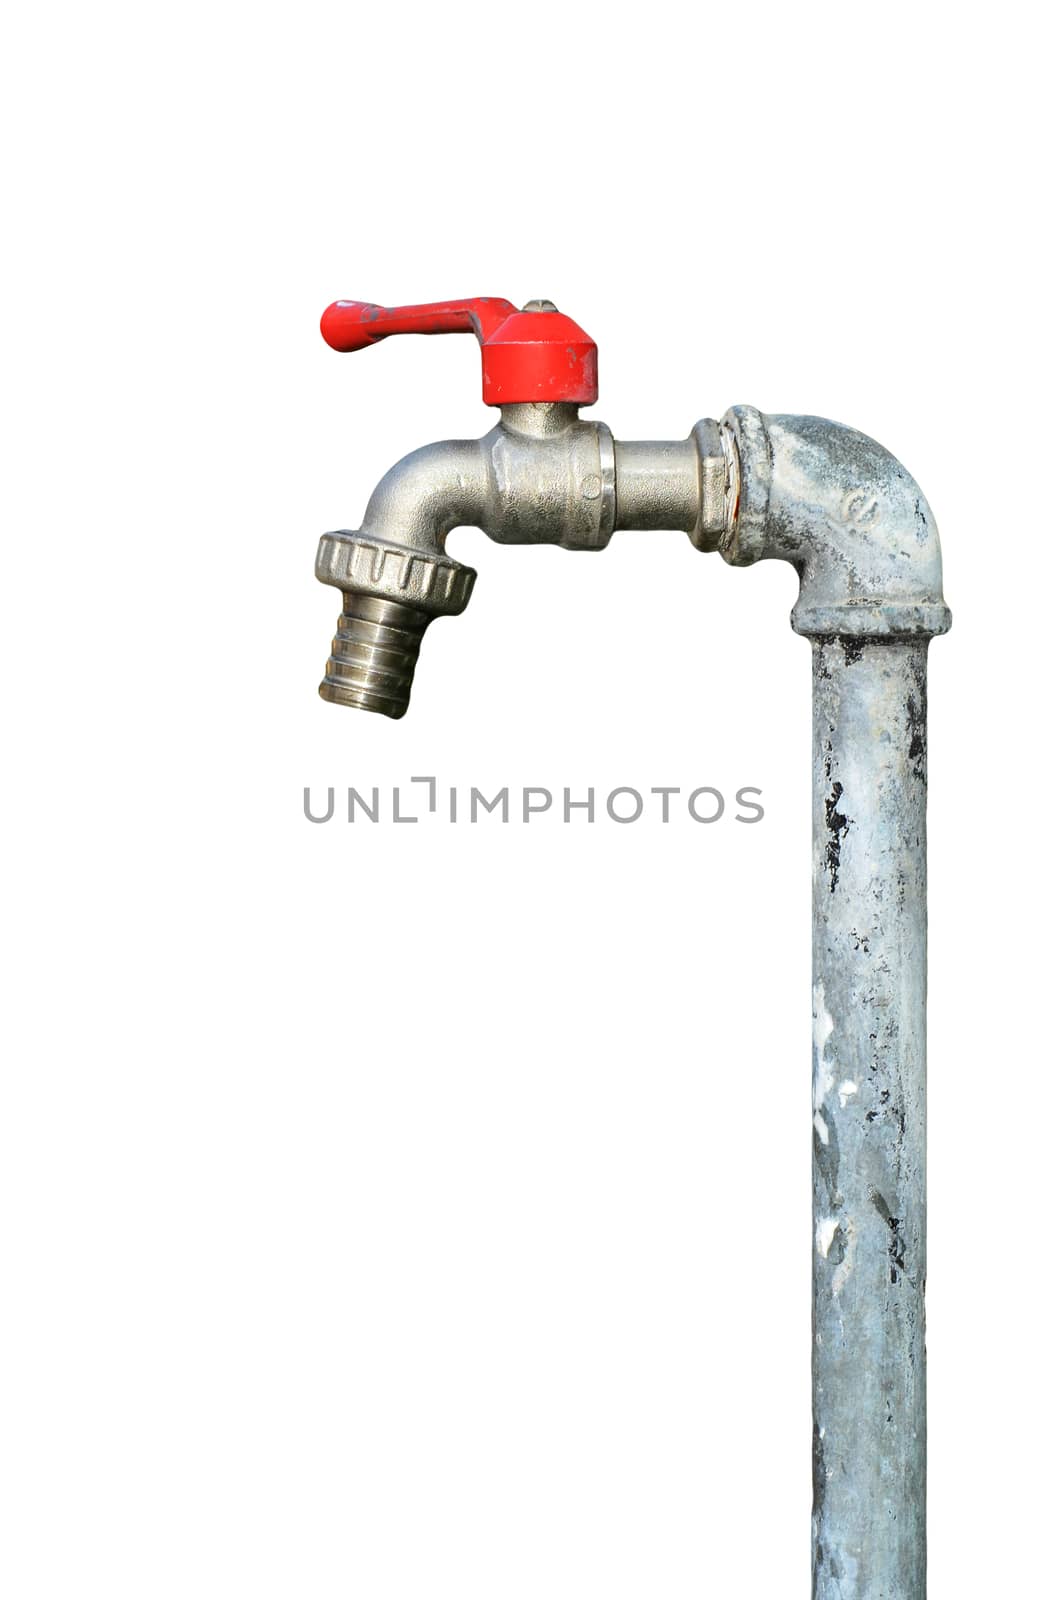 faucet with red handles by raweenuttapong